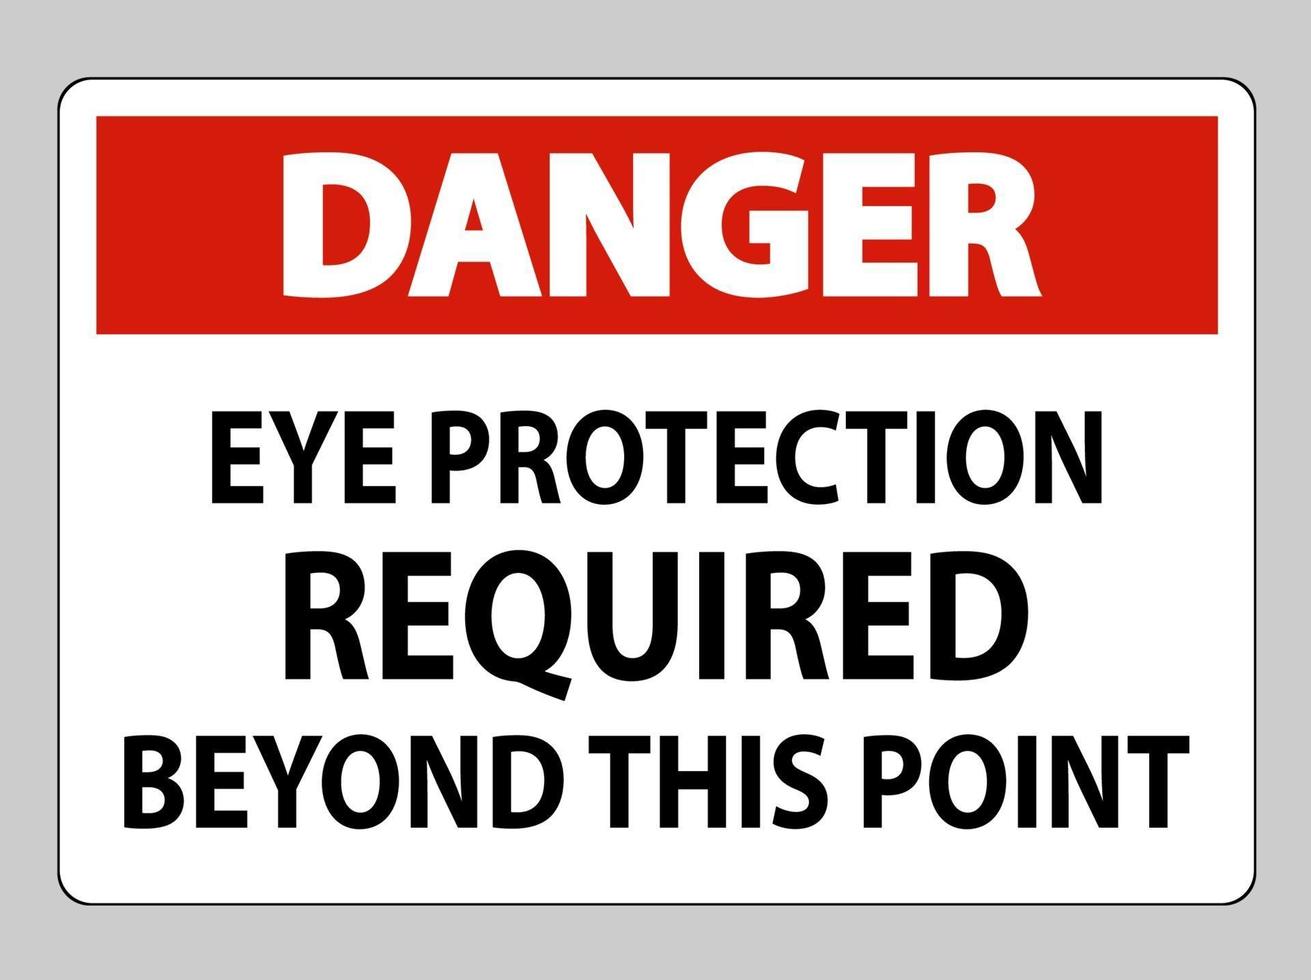 Danger Sign Eye Protection Required Beyond This Point on white background vector